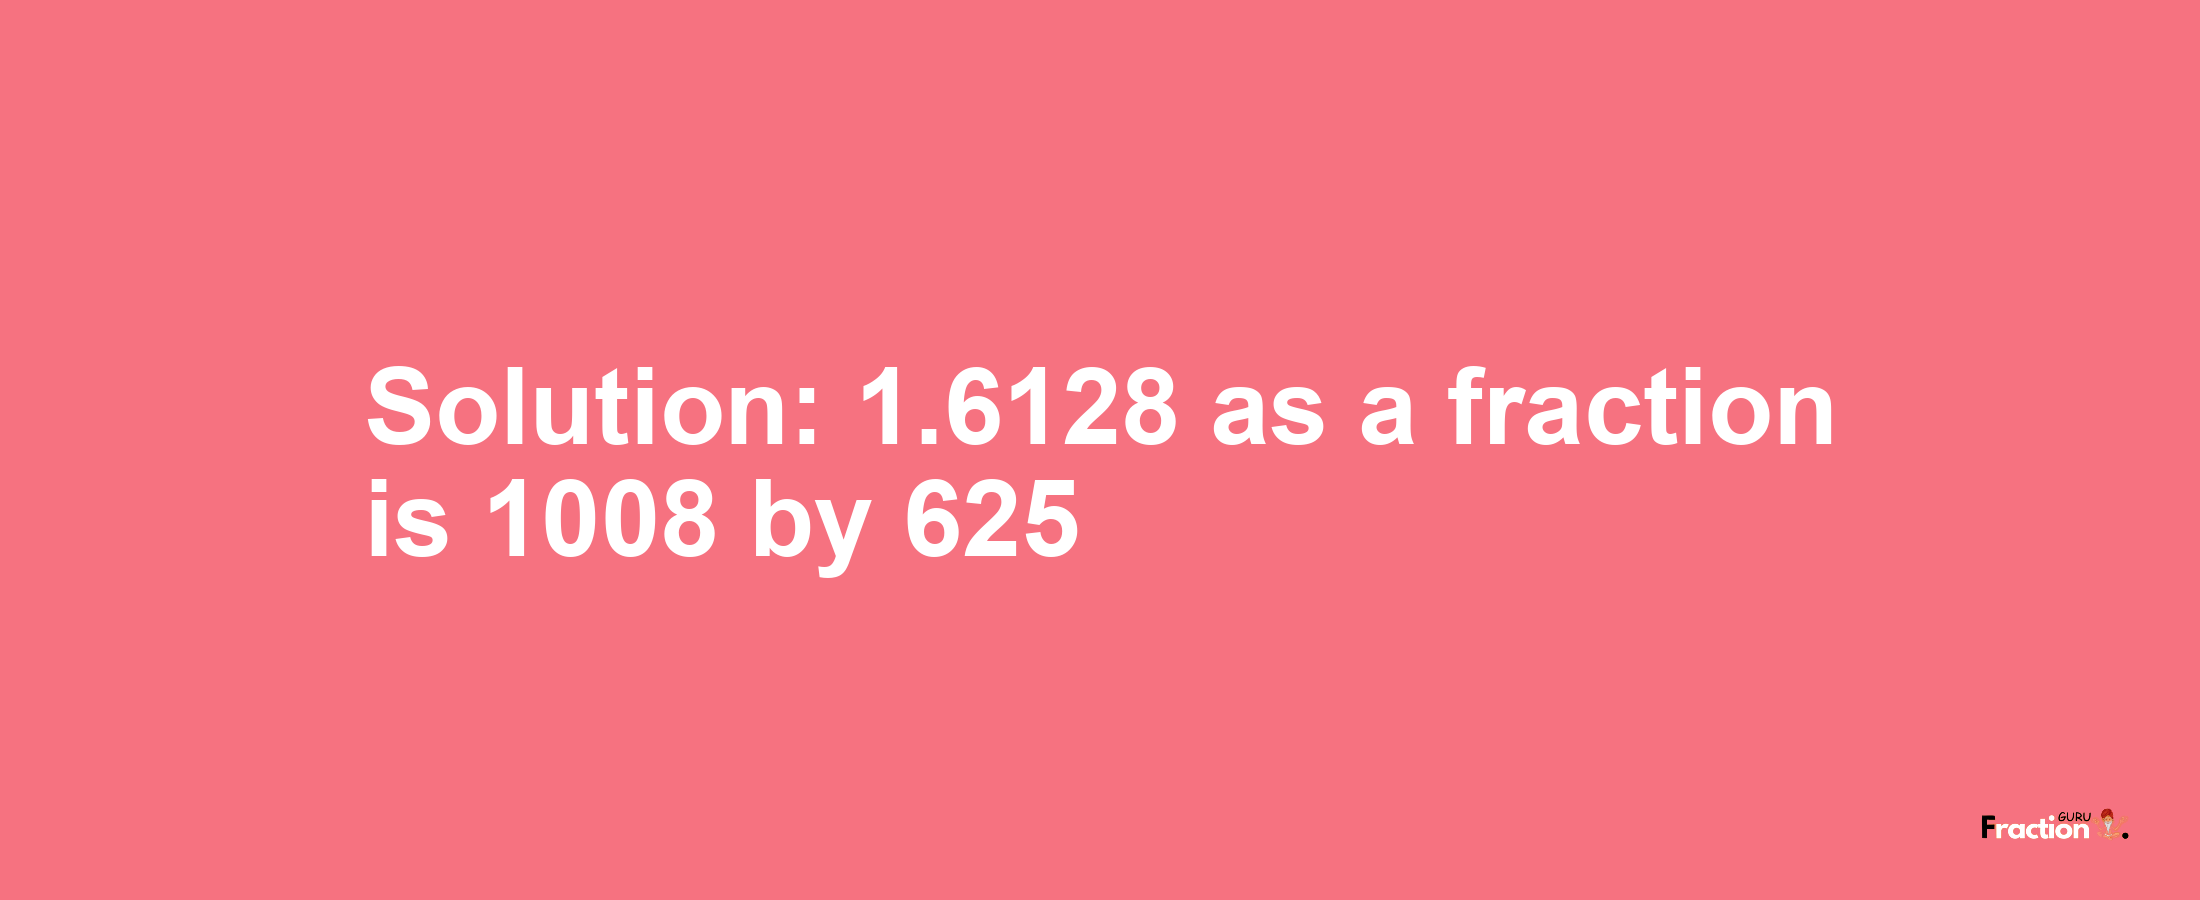 Solution:1.6128 as a fraction is 1008/625